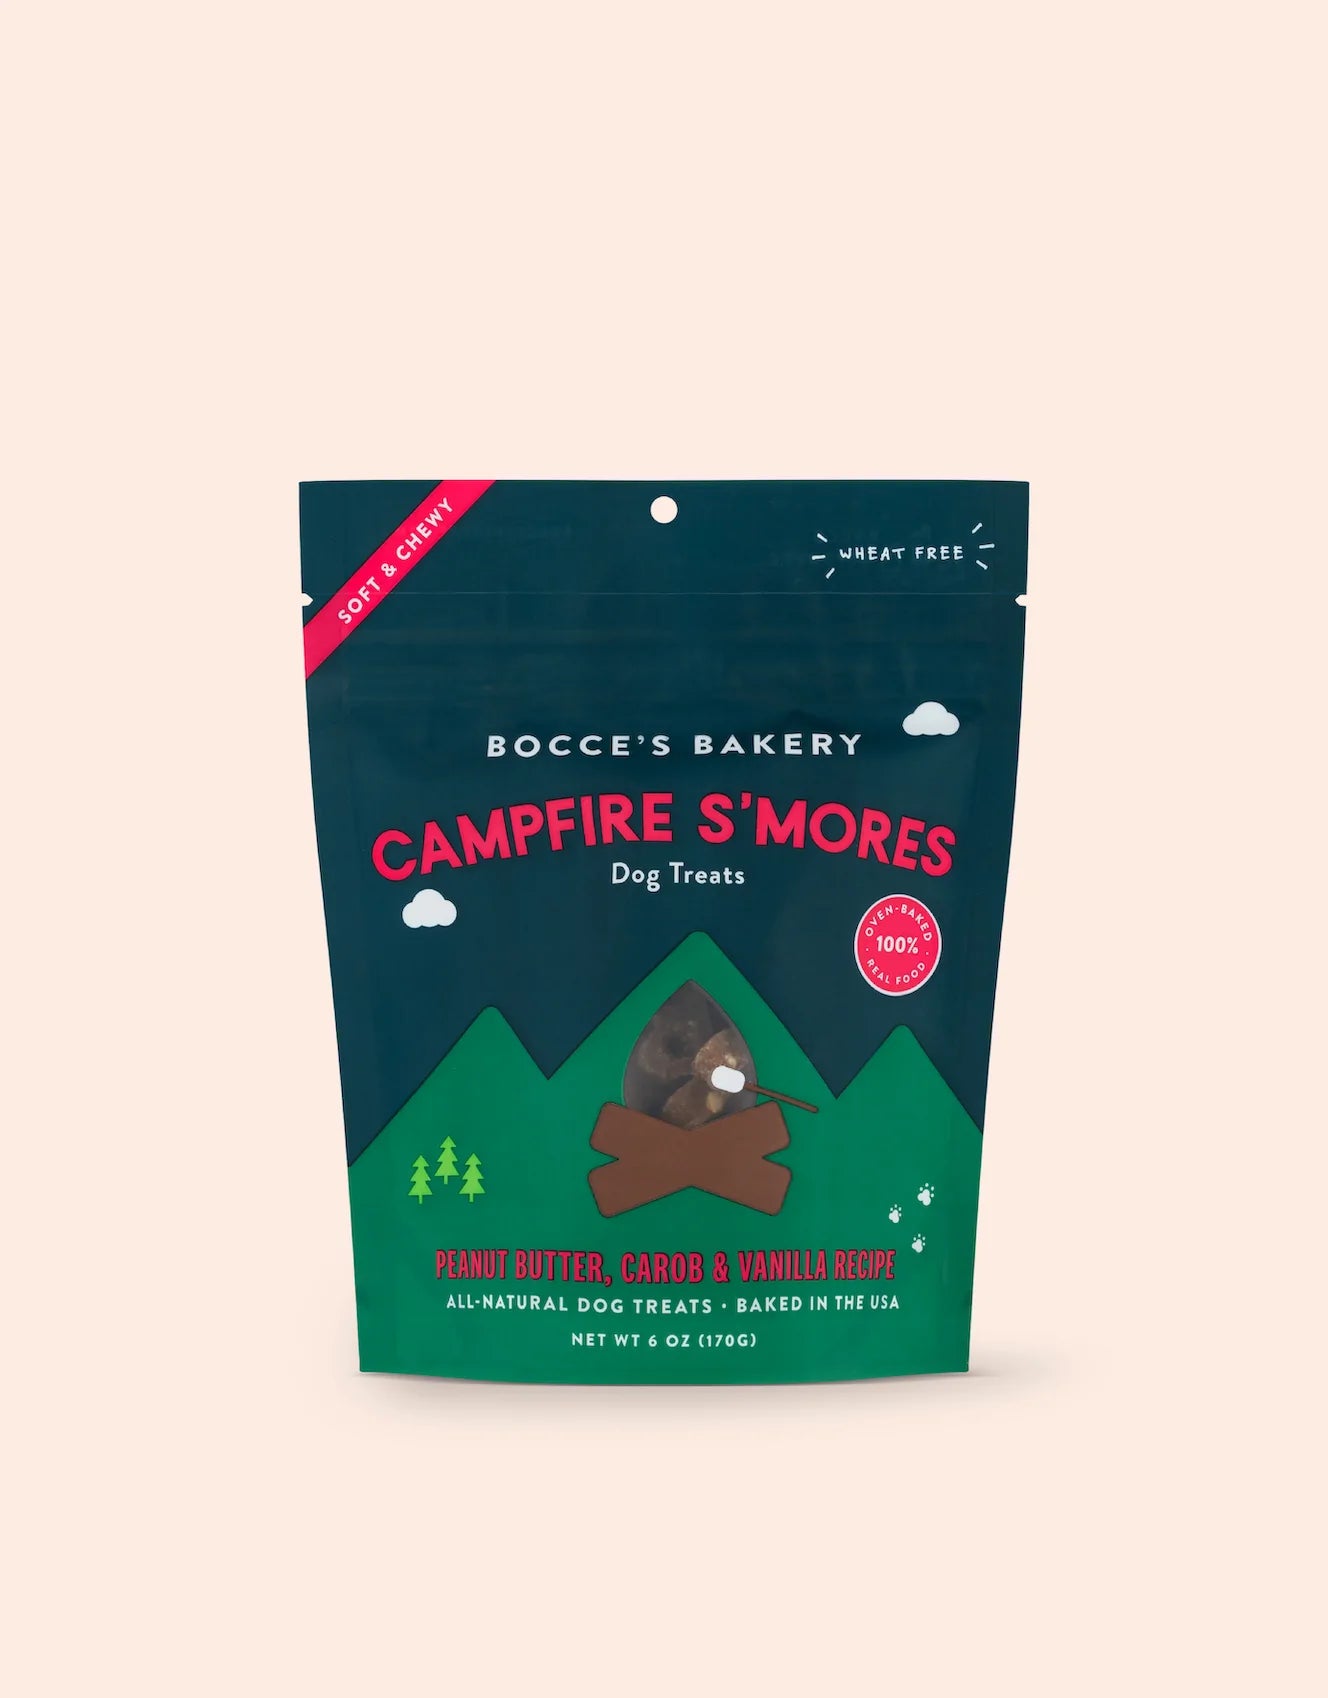 Bocce's "Campfire S'mores" Soft & Chewy Dog Treats - Crew LaLa